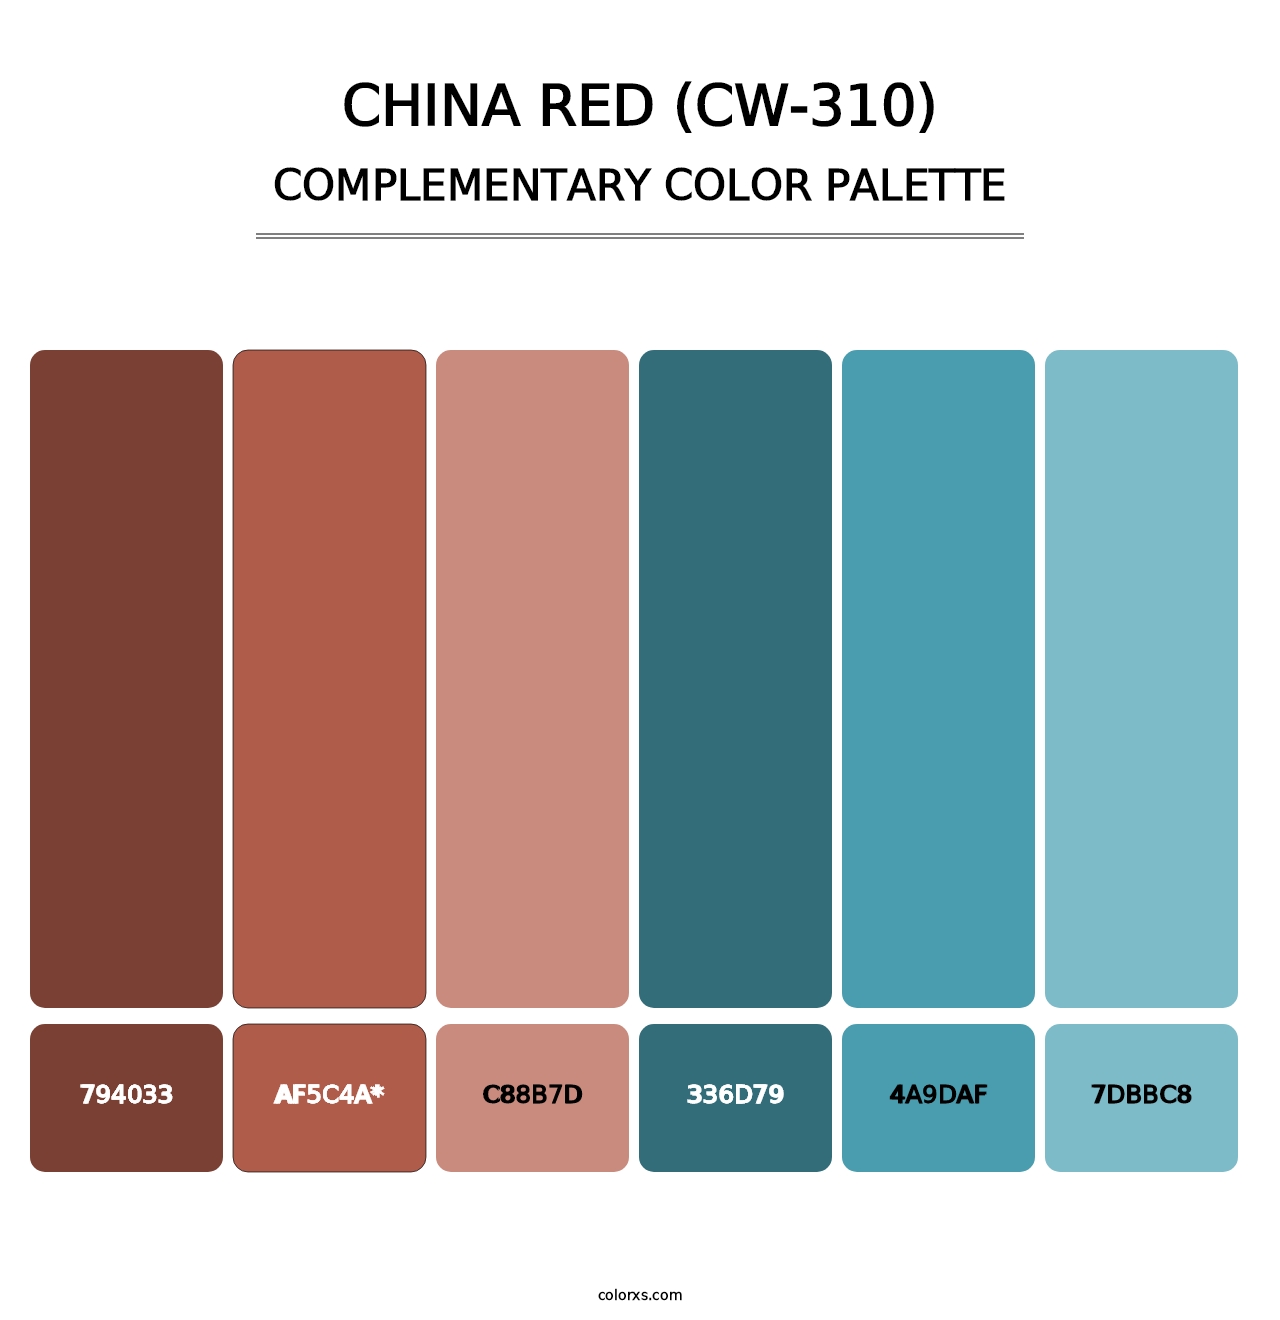 China Red (CW-310) - Complementary Color Palette